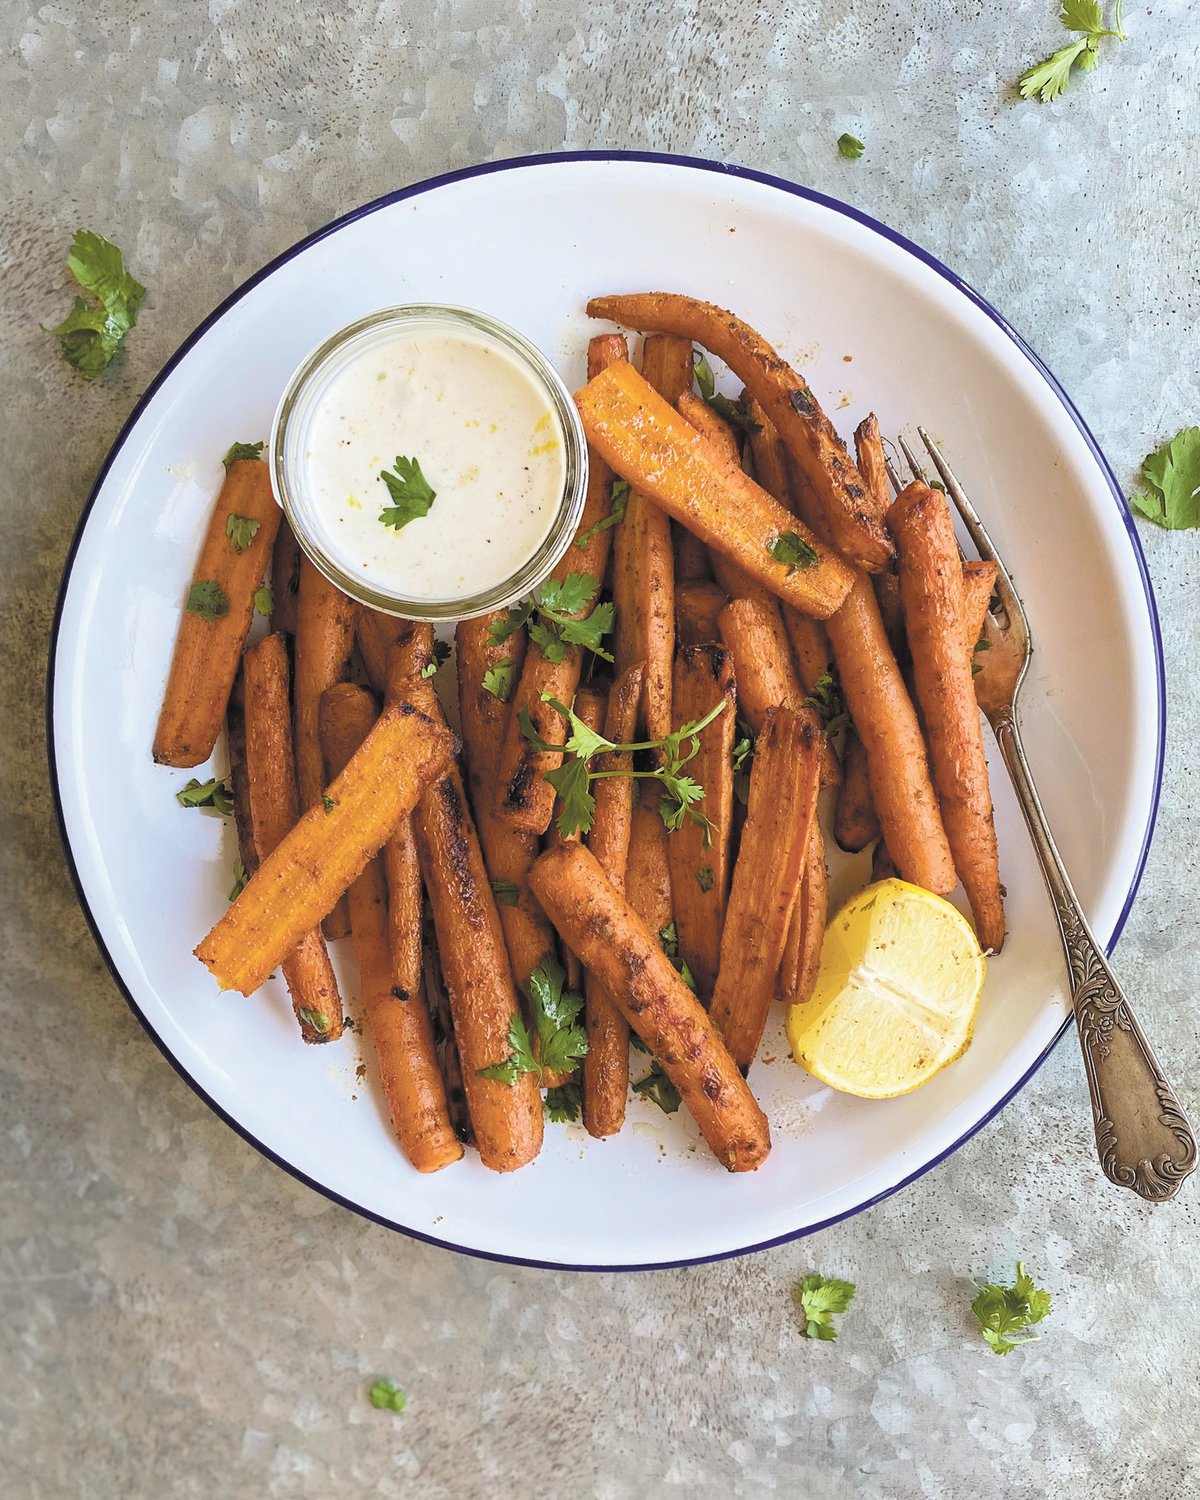 This recipe shines the spotlight on the humble carrot.